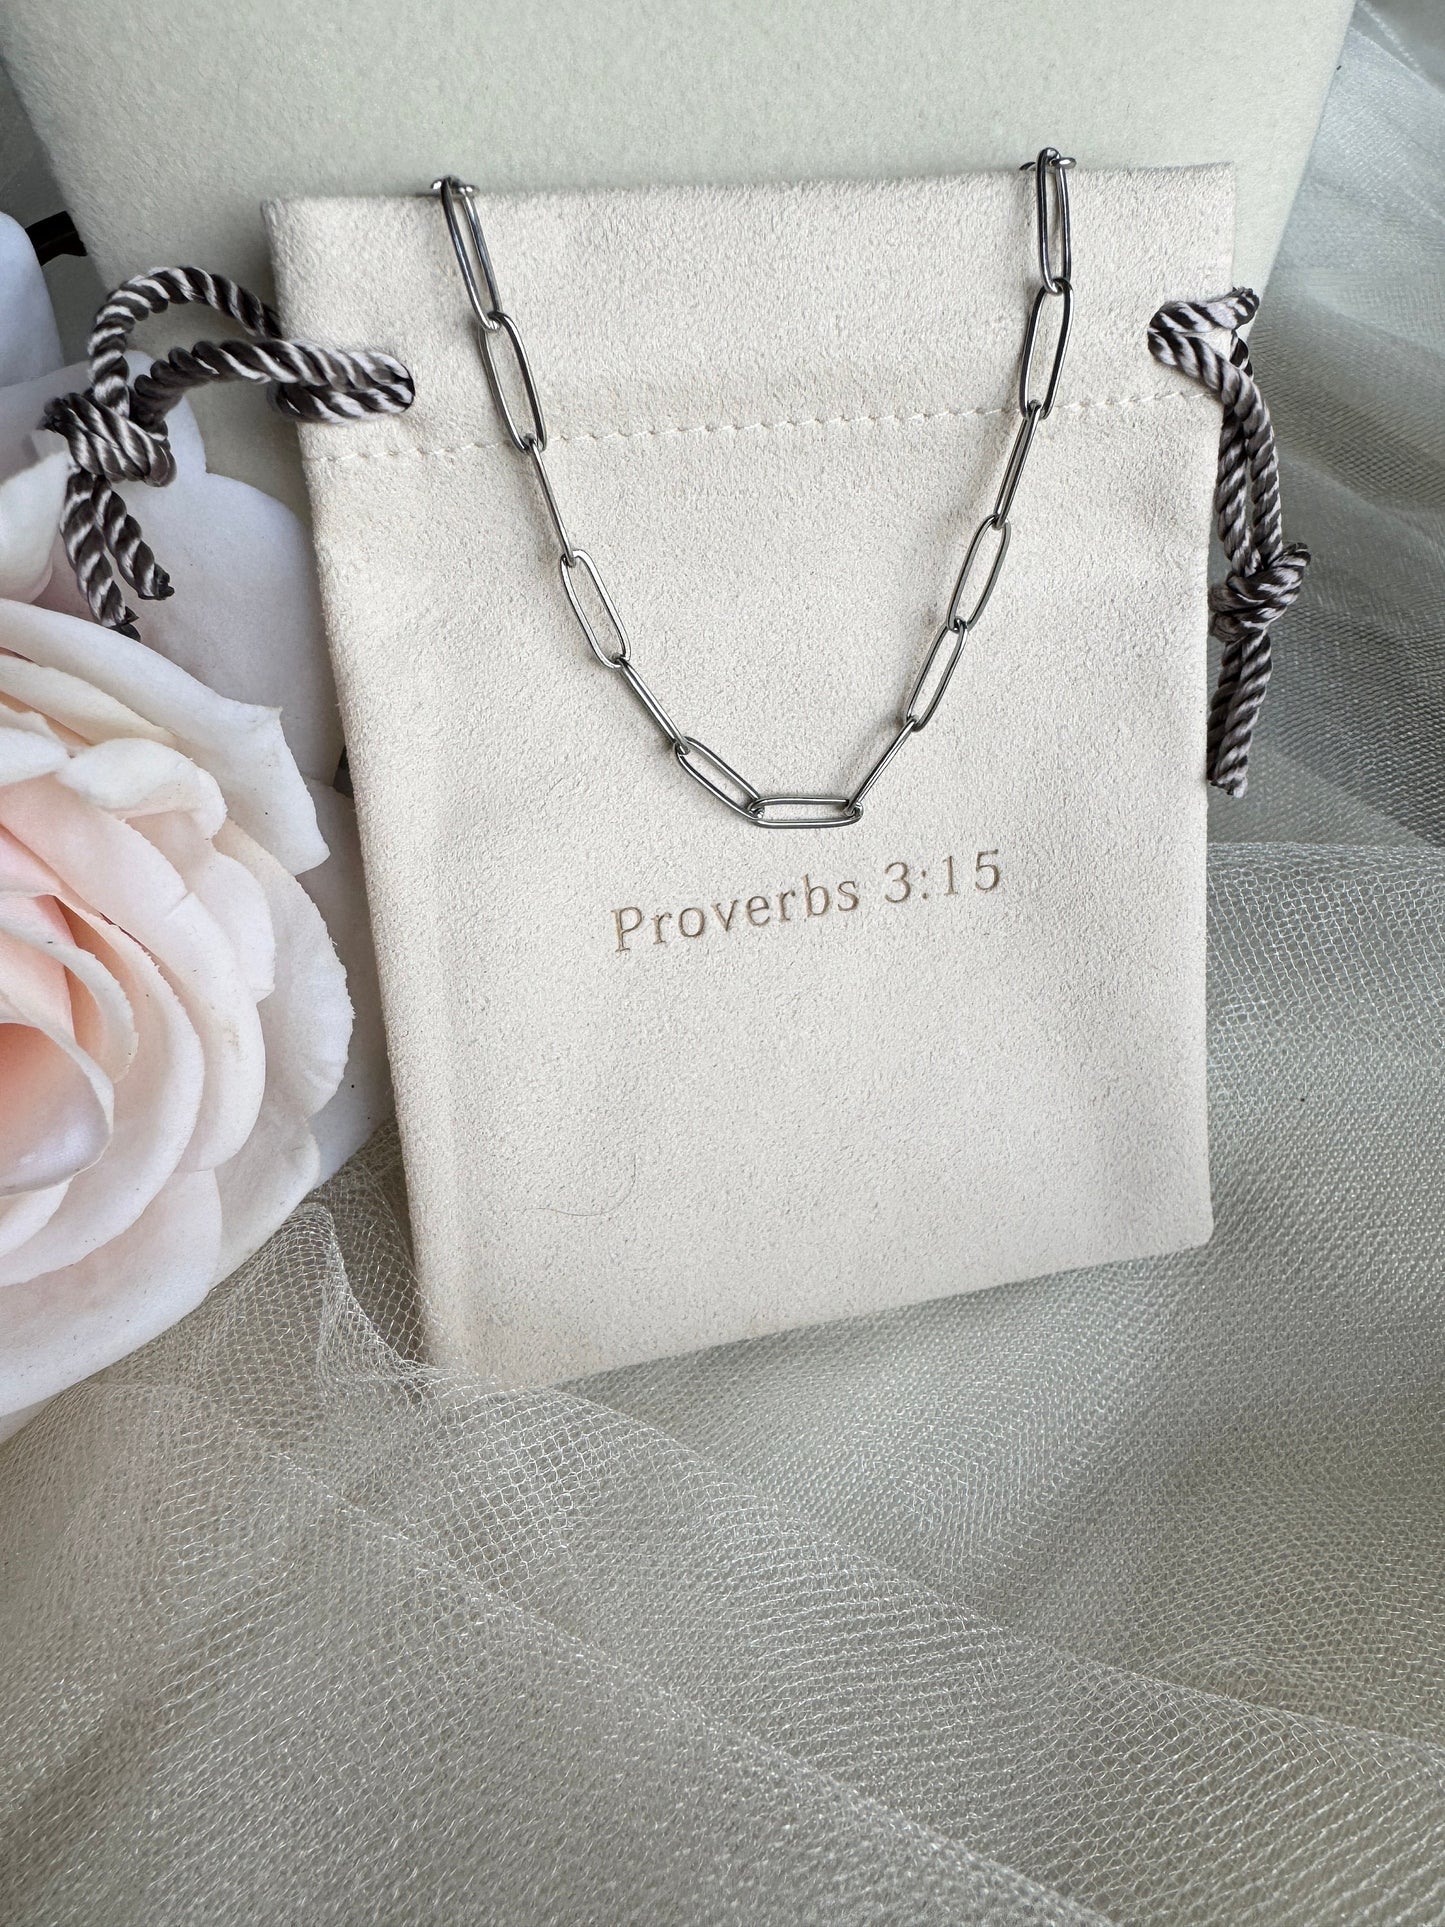 Silver Paperclip Chain Silver Cross Pendant Necklace Set Gift for Mom Christian Gift for Her Silver Cross Necklace Gift